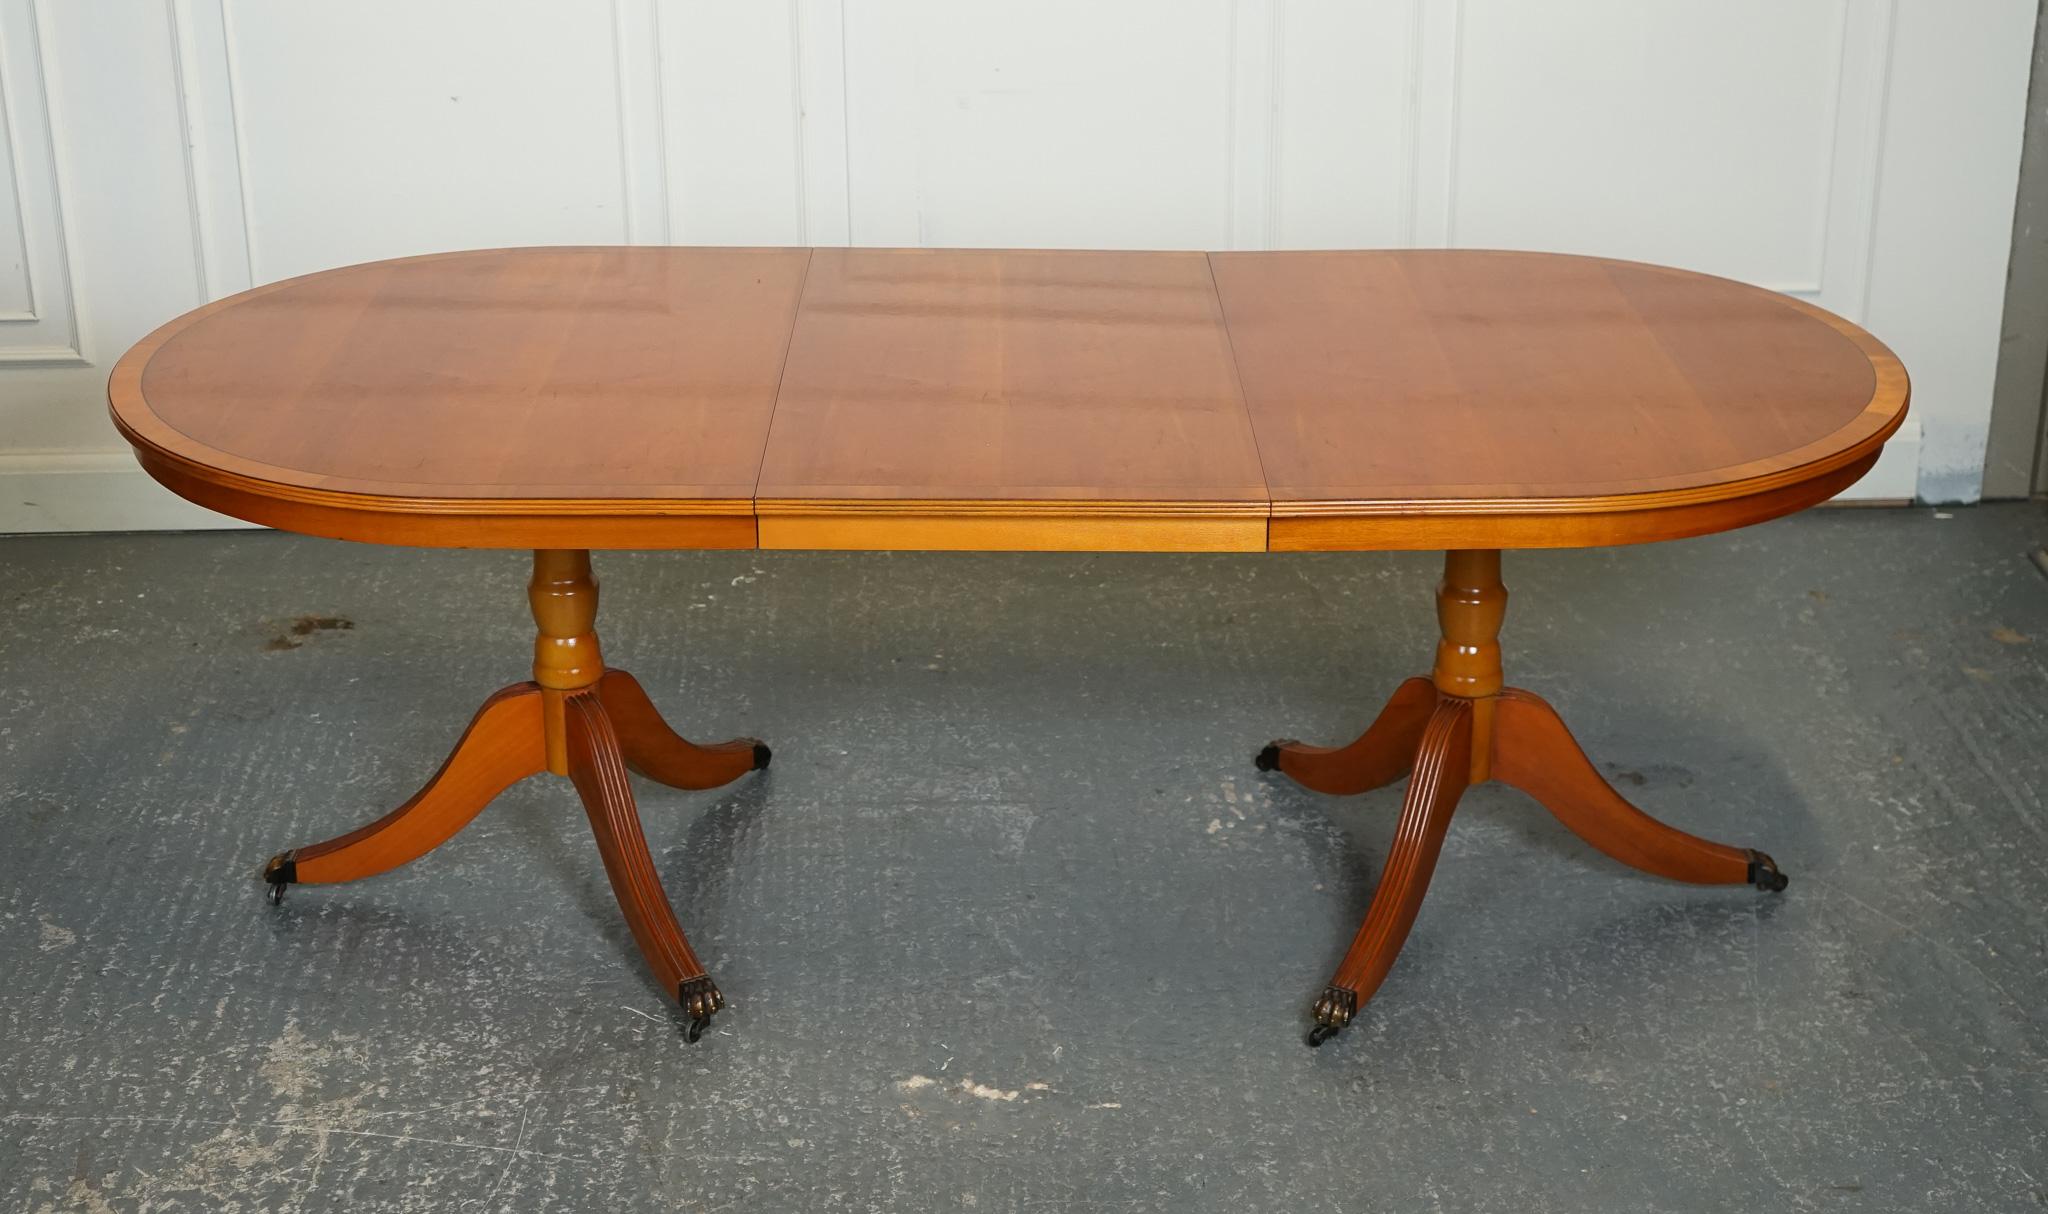 Hand-Crafted VINTAGE TWIN PEDESTAL YEW WOOD EXTENDING DINiNG TABLE 6 TO 8 PERSON J1 For Sale